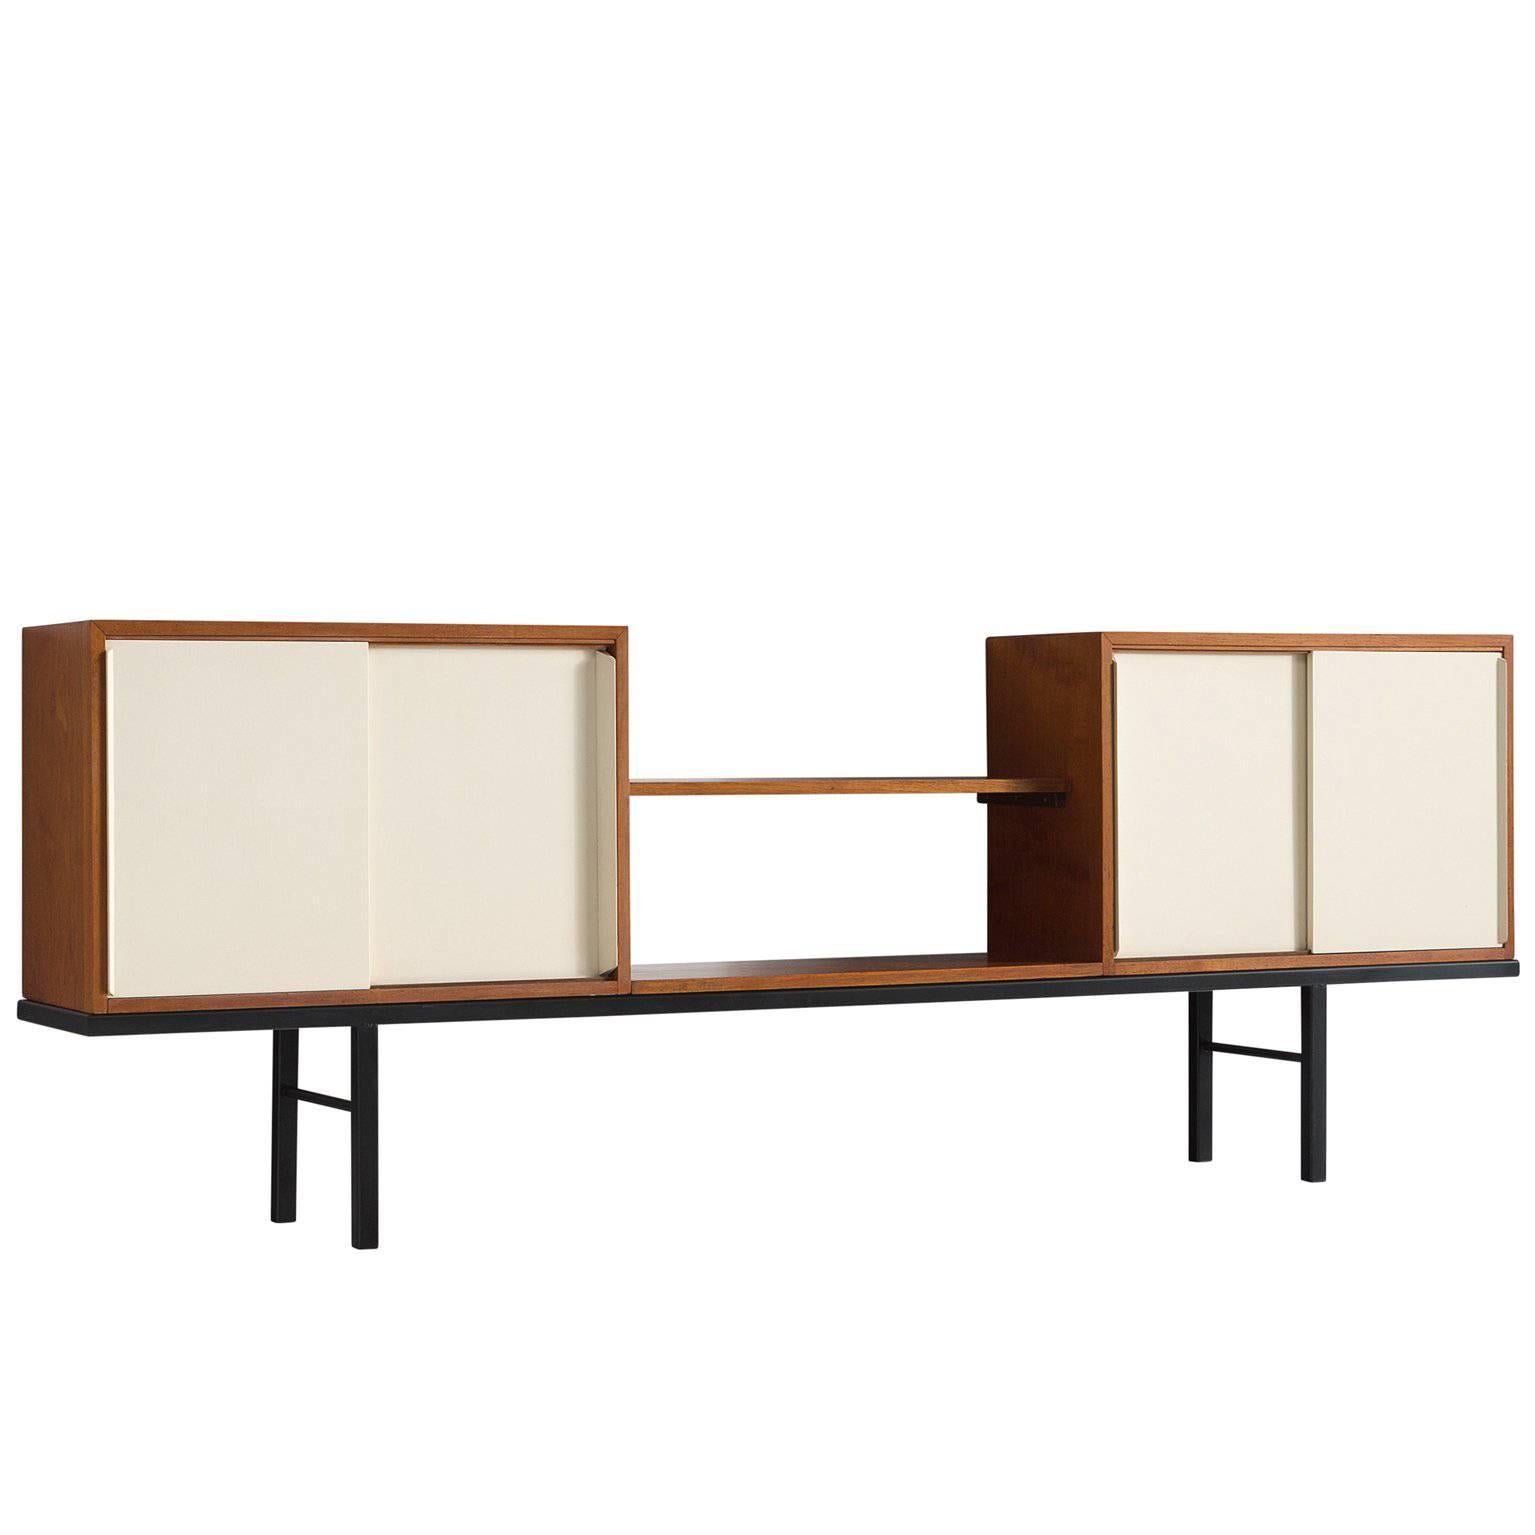 Martin Visser Pair of Sideboards from Bornholm Collection